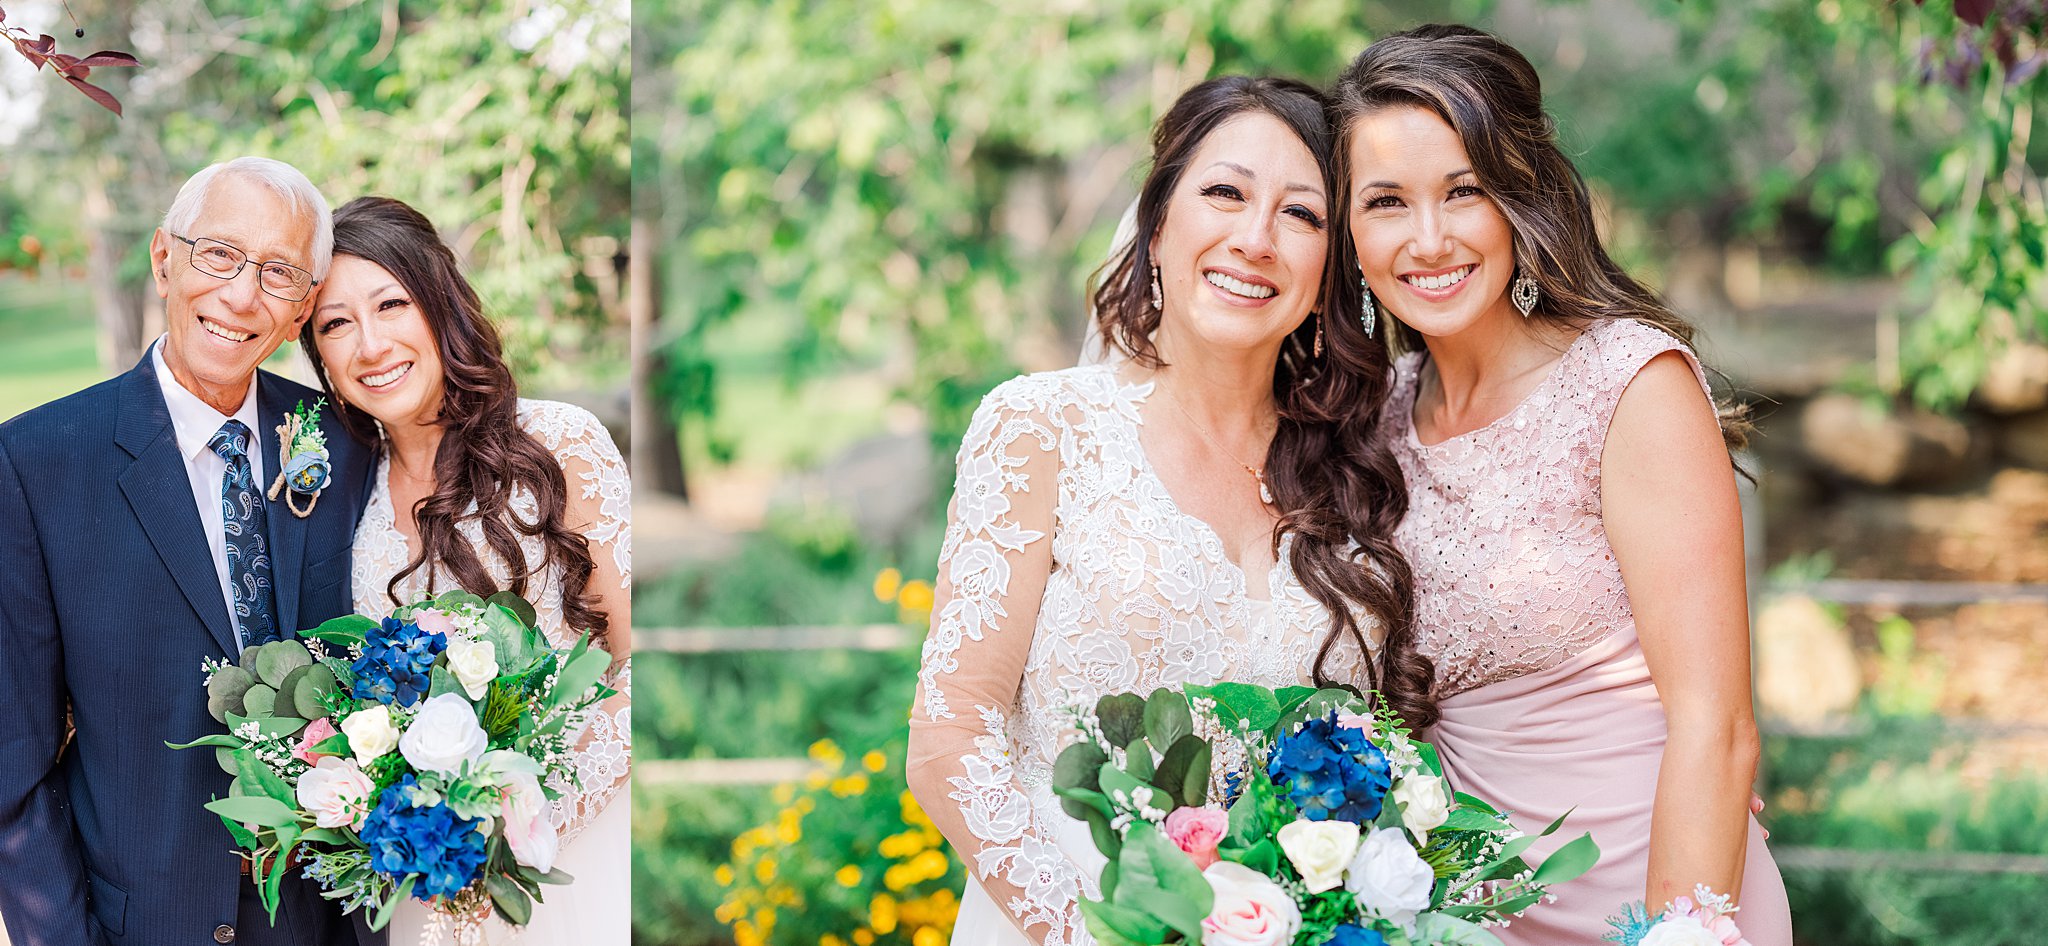 Peggy and Dave's Wedding Session - Ethereal Photography Inc.